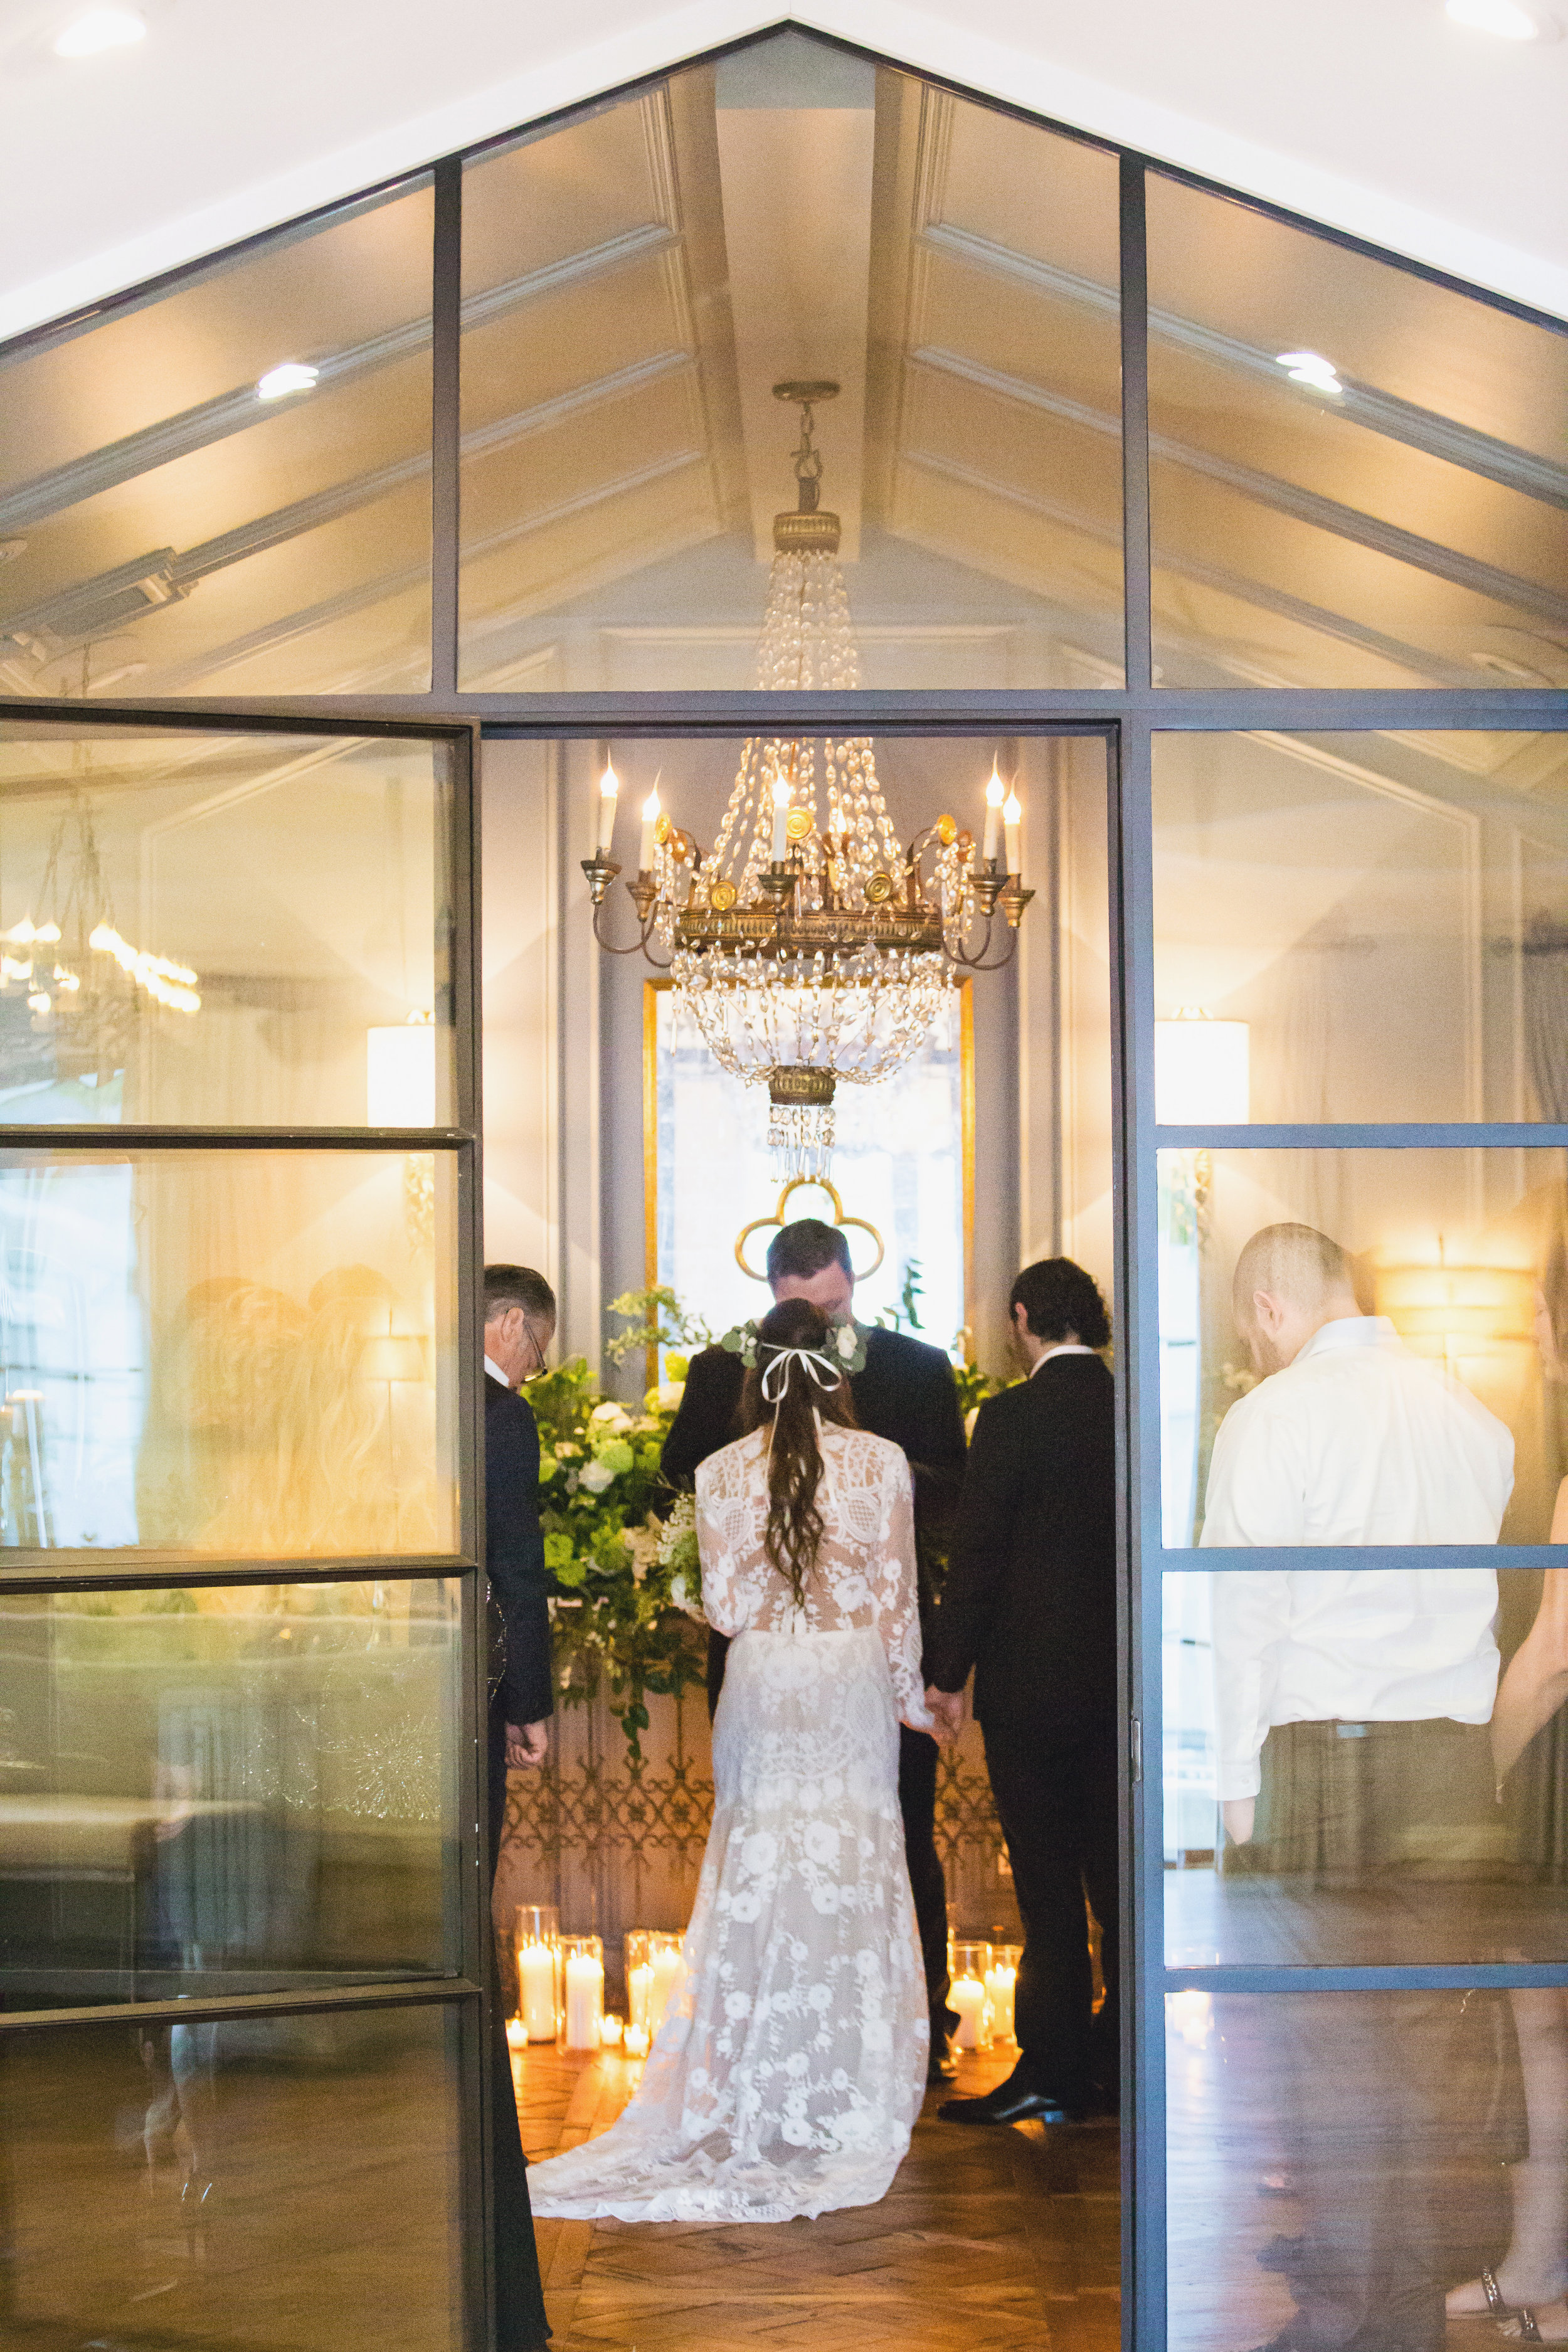 Ceremony-At-Home-Loacation-Private-Wedding-Houston.jpg